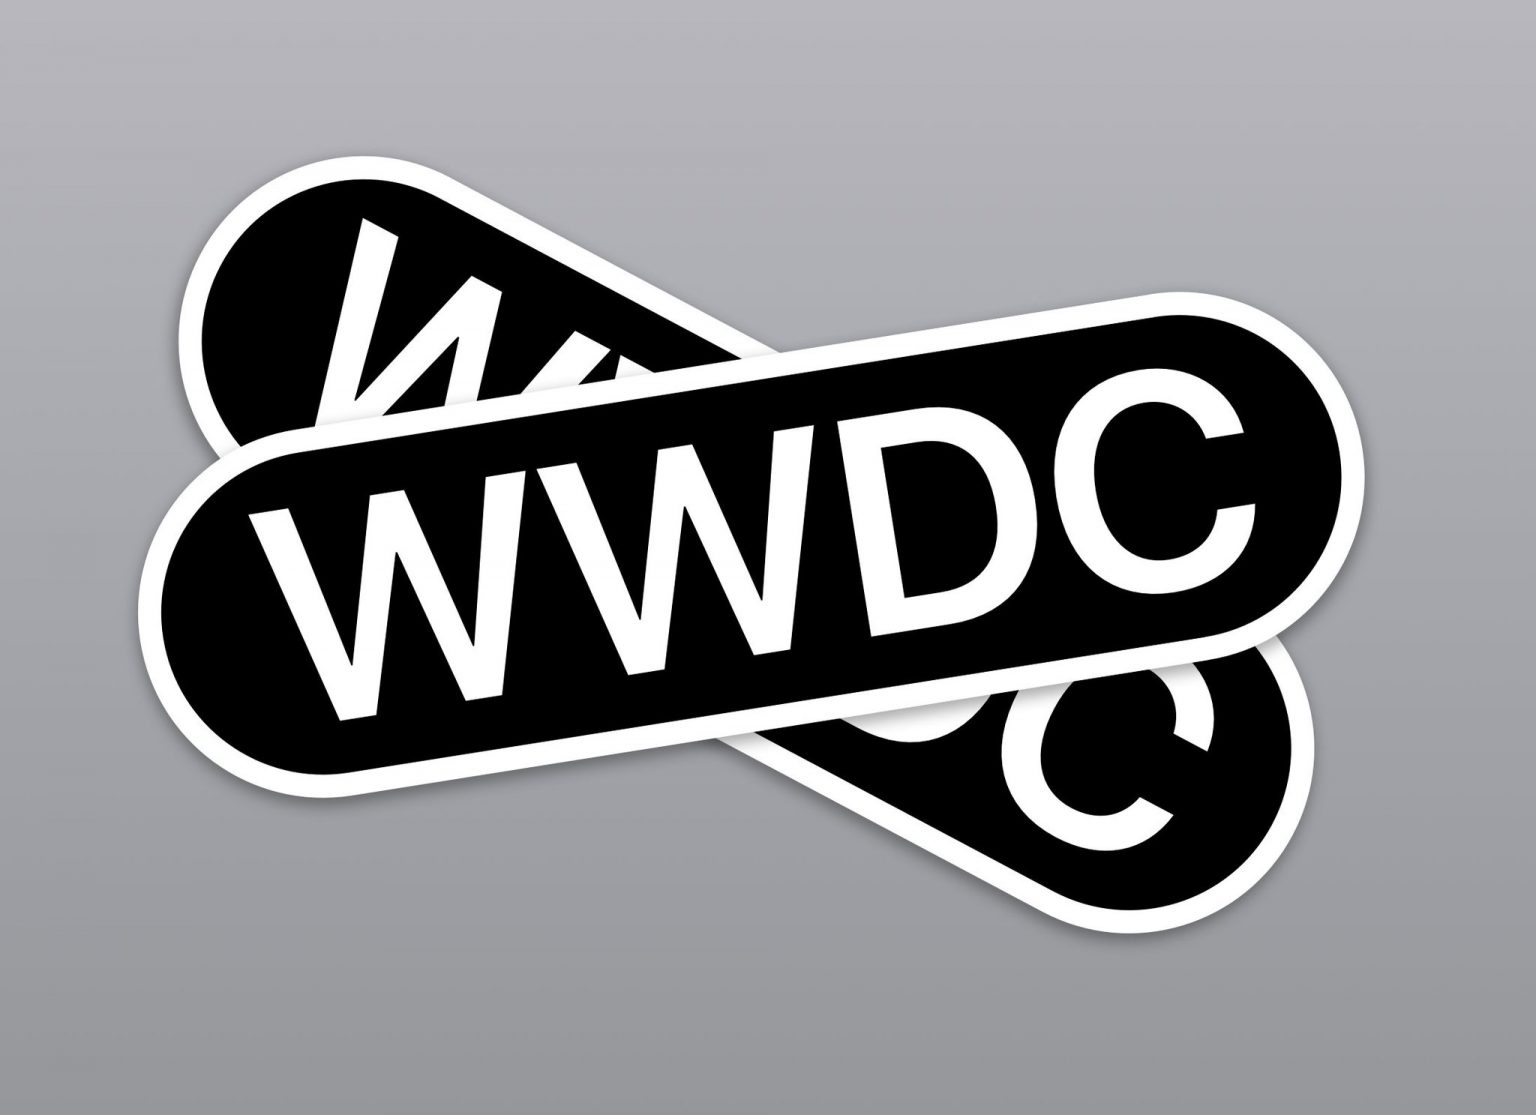 Download WWDC 2020 Wallpapers For iPhone, iPad & Mac